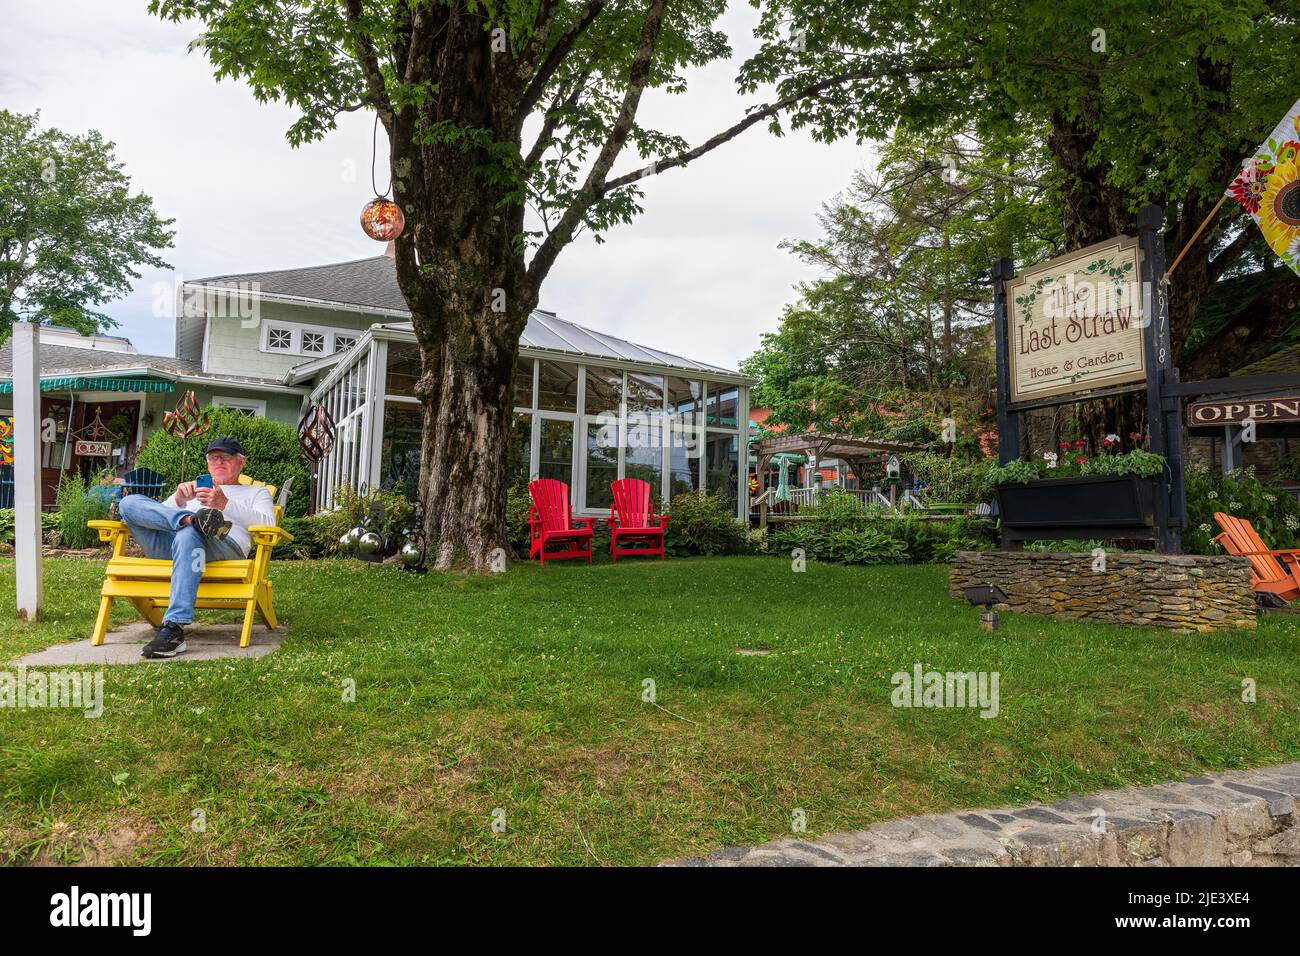 BLOWING ROCK, NC, USA-20 JUNE 2022: The Last Straw shop on Main Street, shows building, sign and one man in chair reading cell phone. Stock Photo